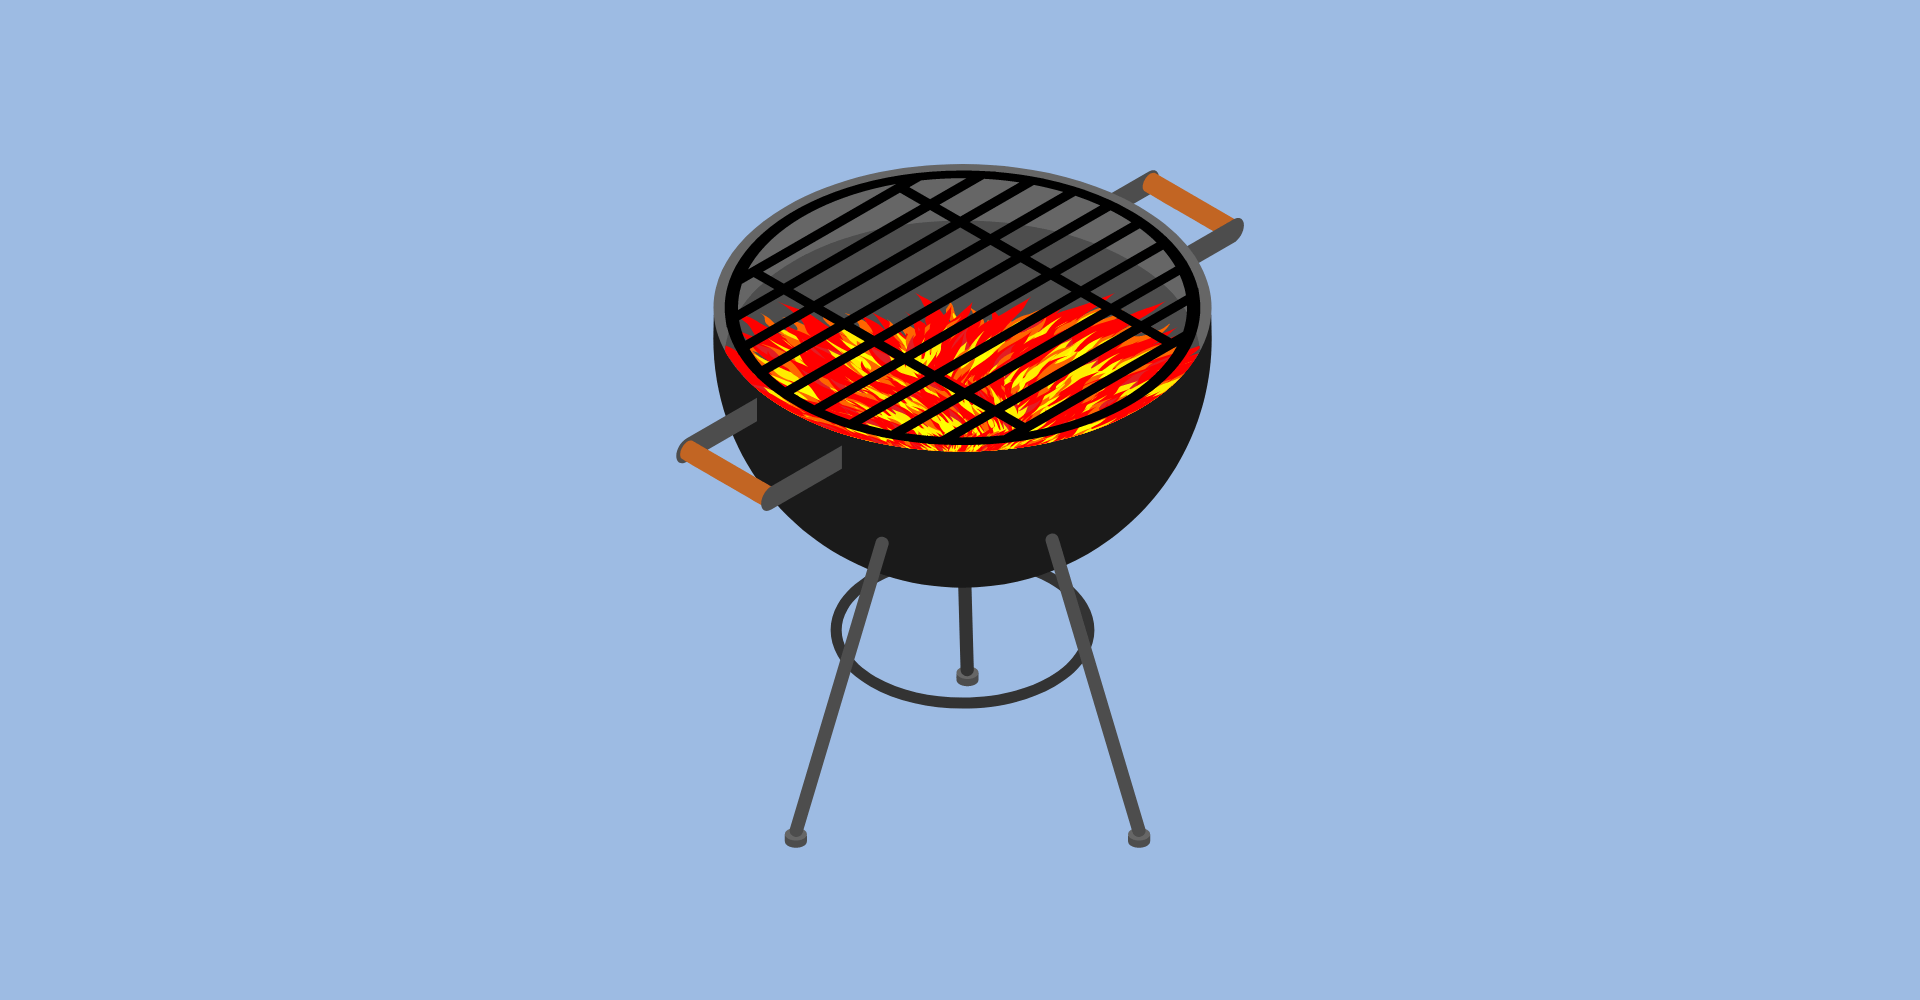 illustrated grill with fire on blue background for grilling gifts article'